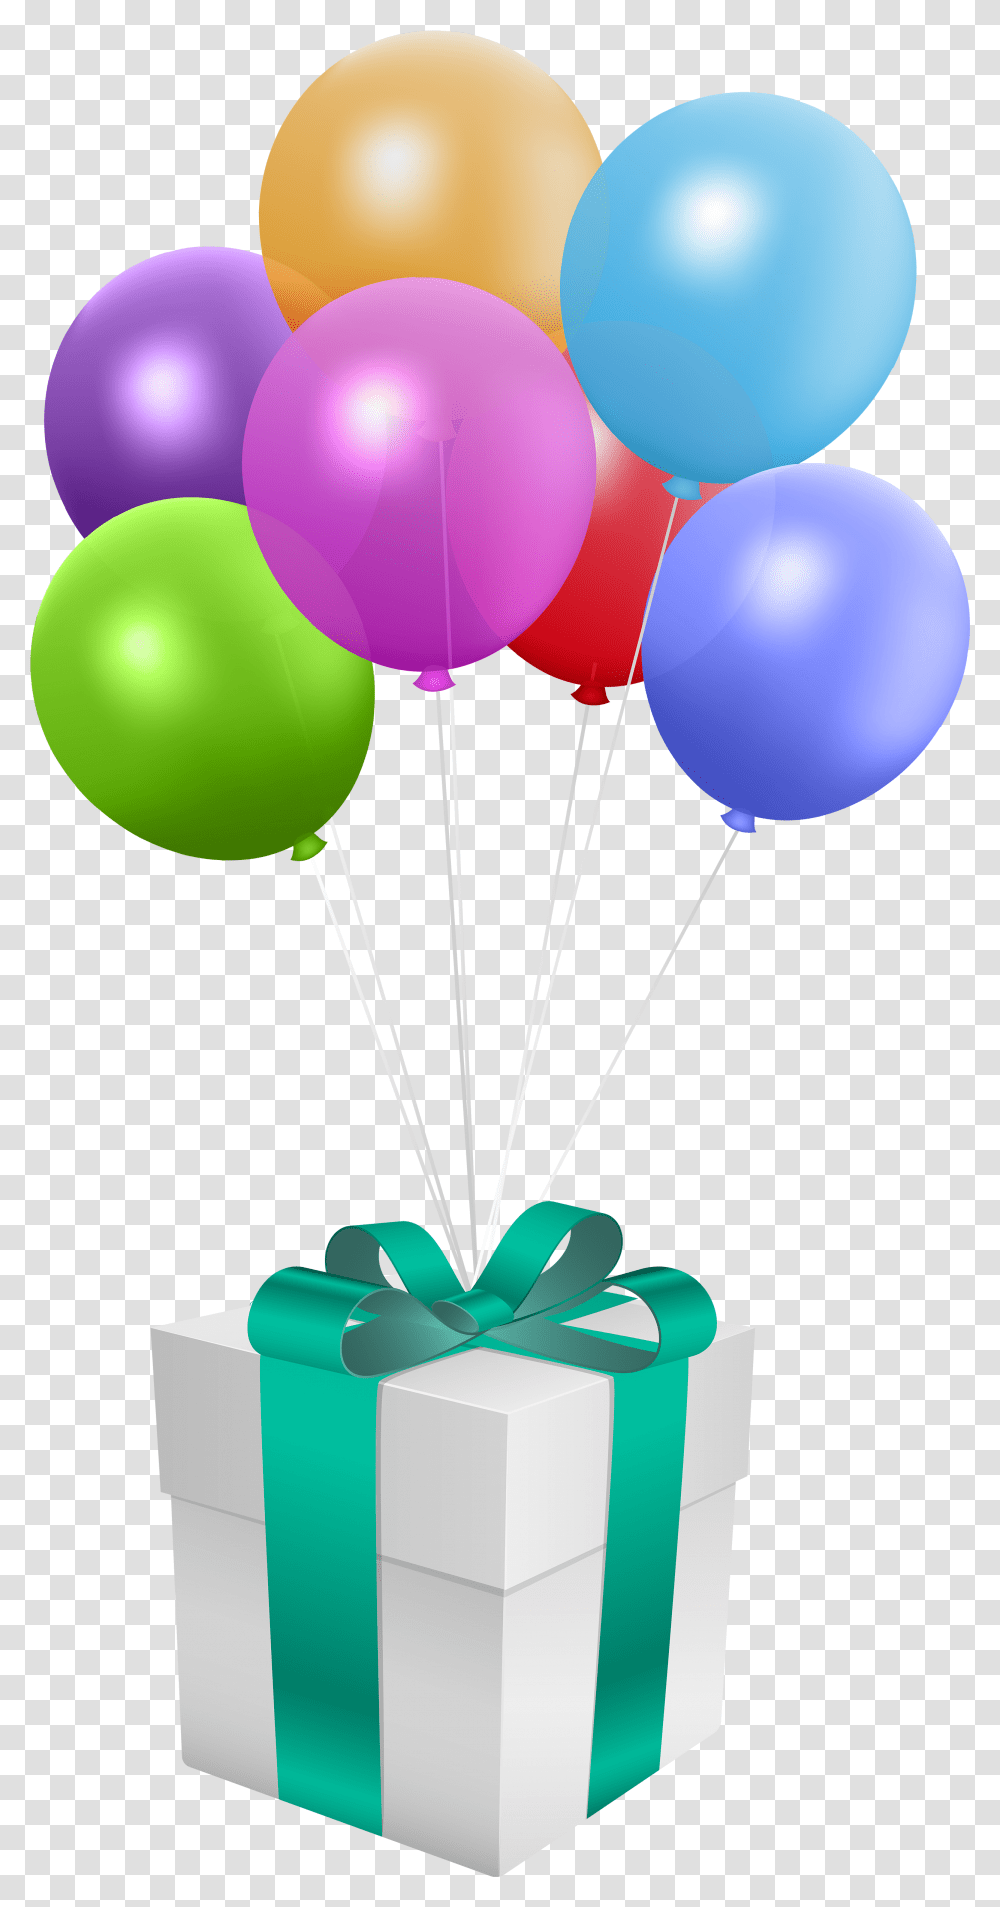 Balloon Birthday Balloons Gift Box With Balloons Transparent Png